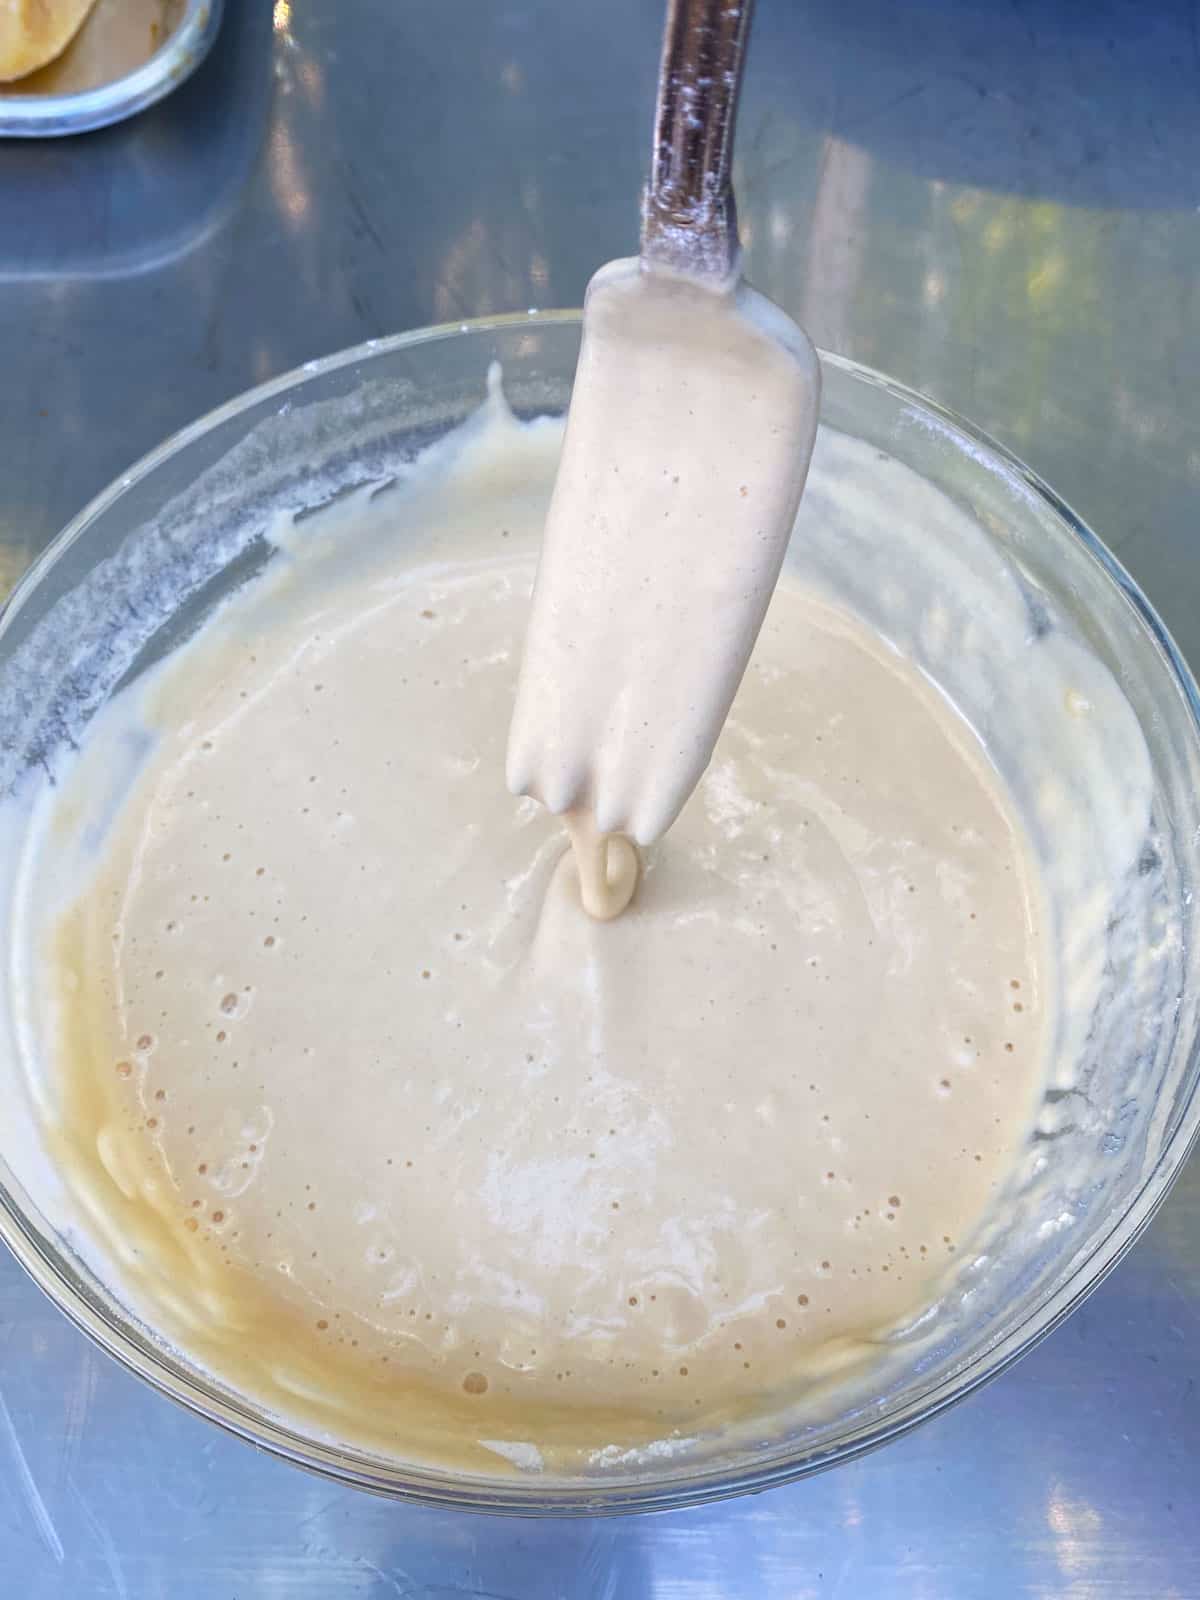 Whisk the fritter batter until thickened.